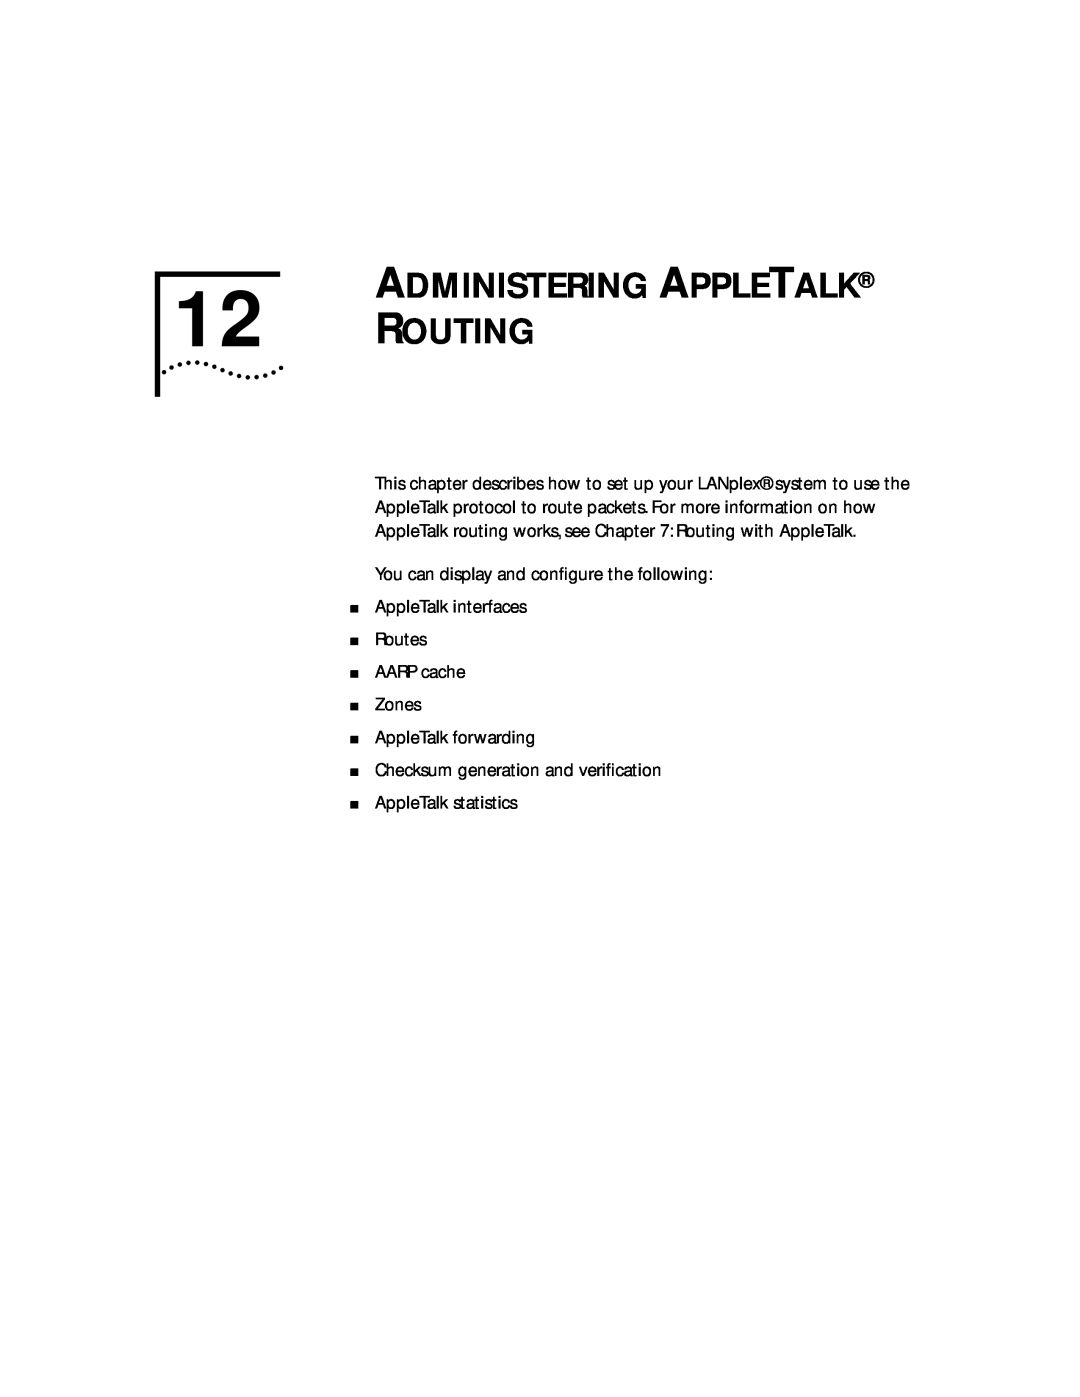 3Com 2500 manual ADMINISTERING APPLETALK 12 ROUTING, This chapter describes how to set up your LANplex system to use the 